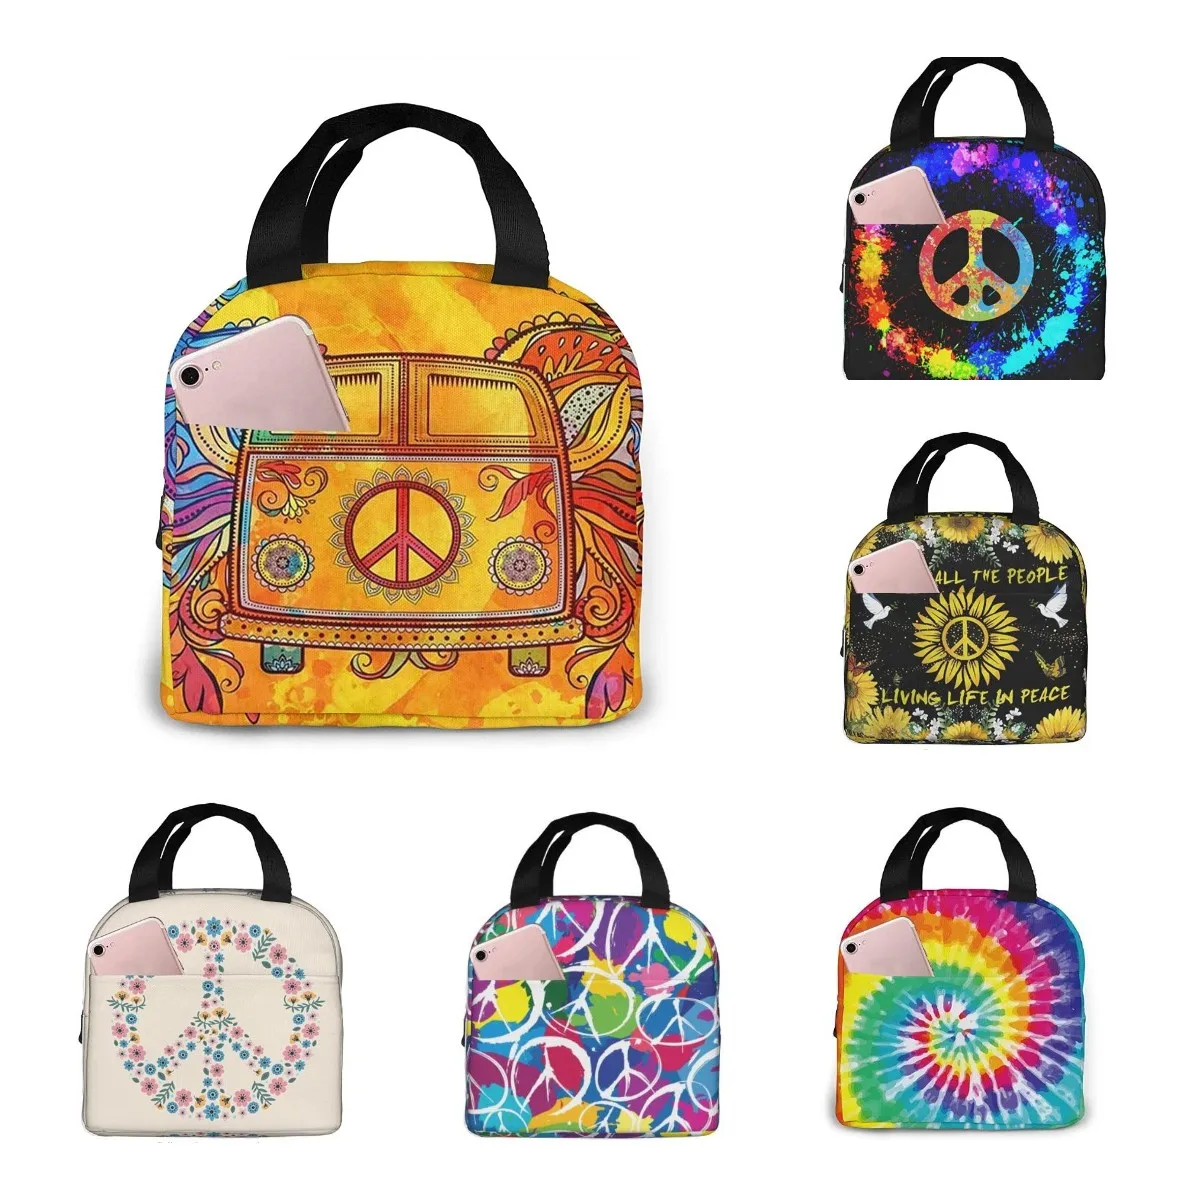 

Hippie Vintage Car a Mini Van with Peace Sign Insulated Lunch Box Reusable Cooler Tote Bag Waterproof Lunch Holder for Women